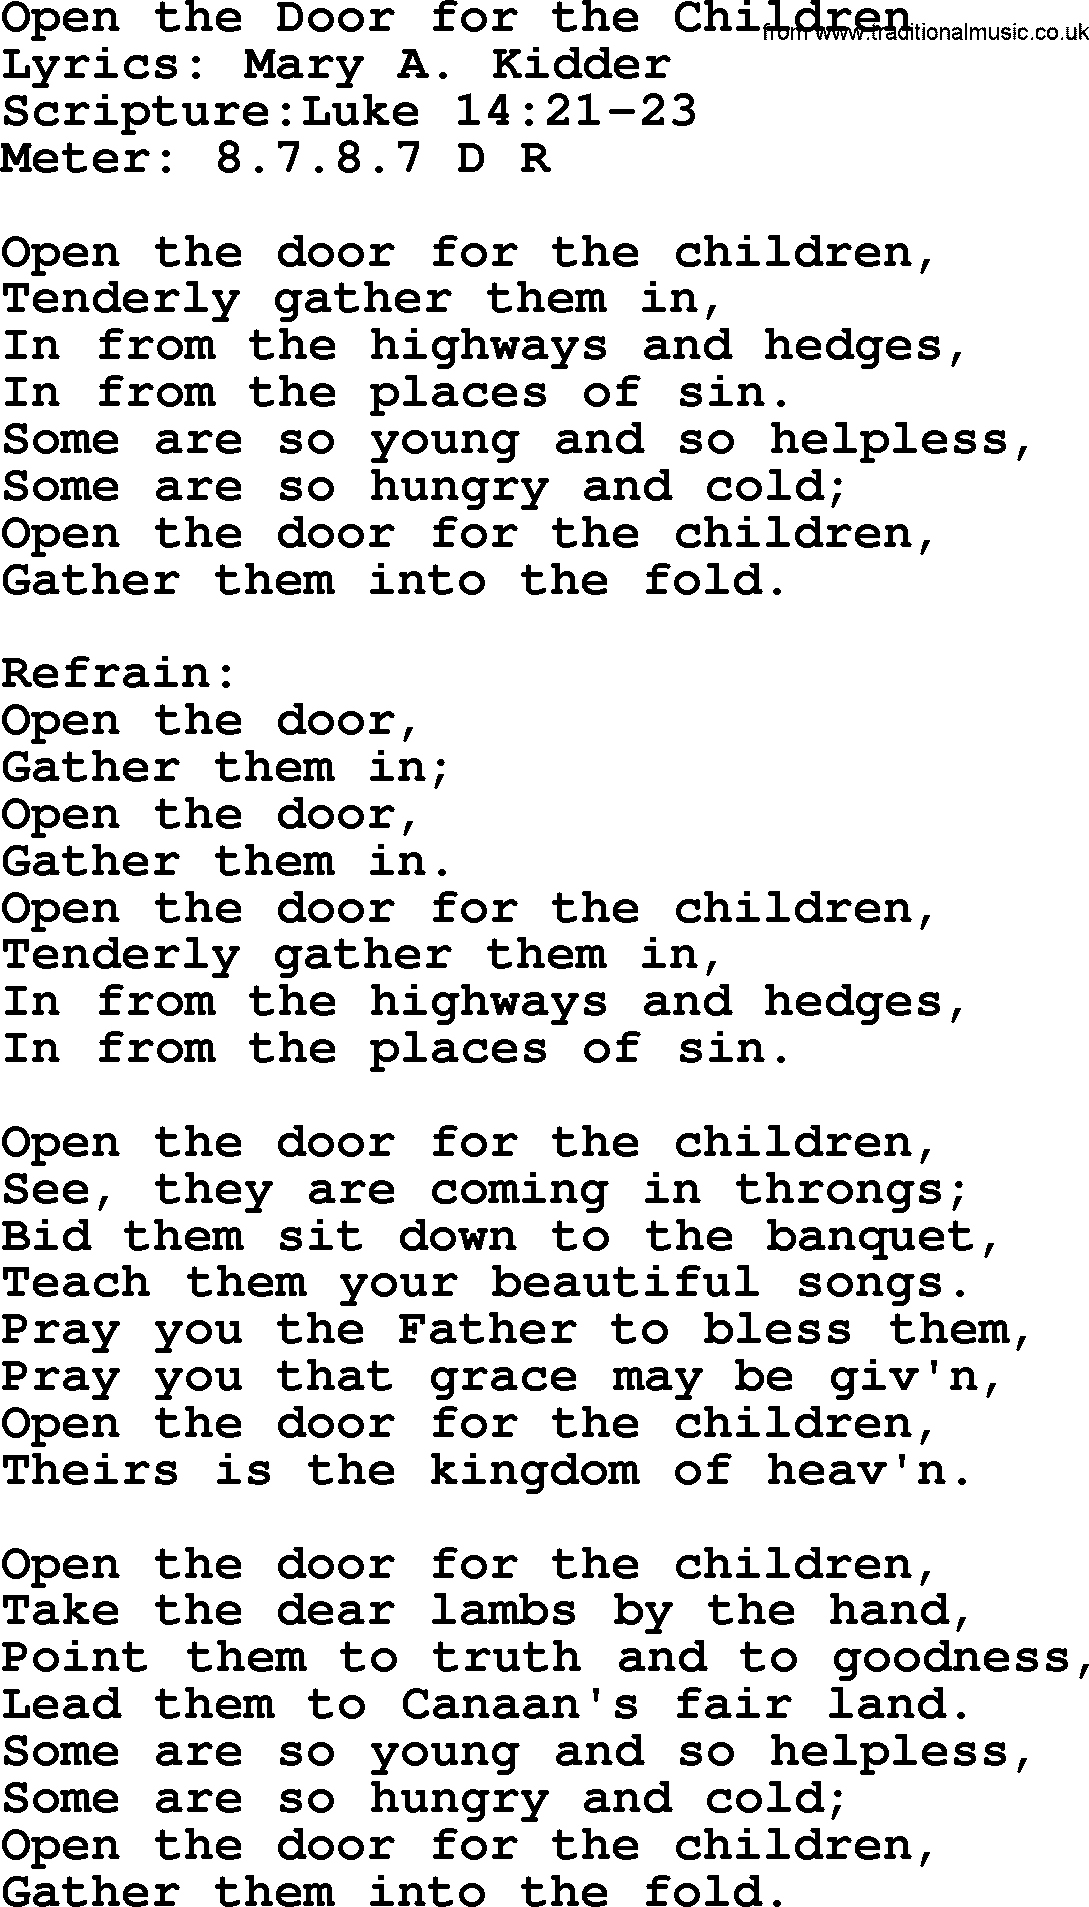 Hymns about  Angels, Hymn: Open the Door for the Children, lyrics, sheet music, midi & Mp3 music with PDF